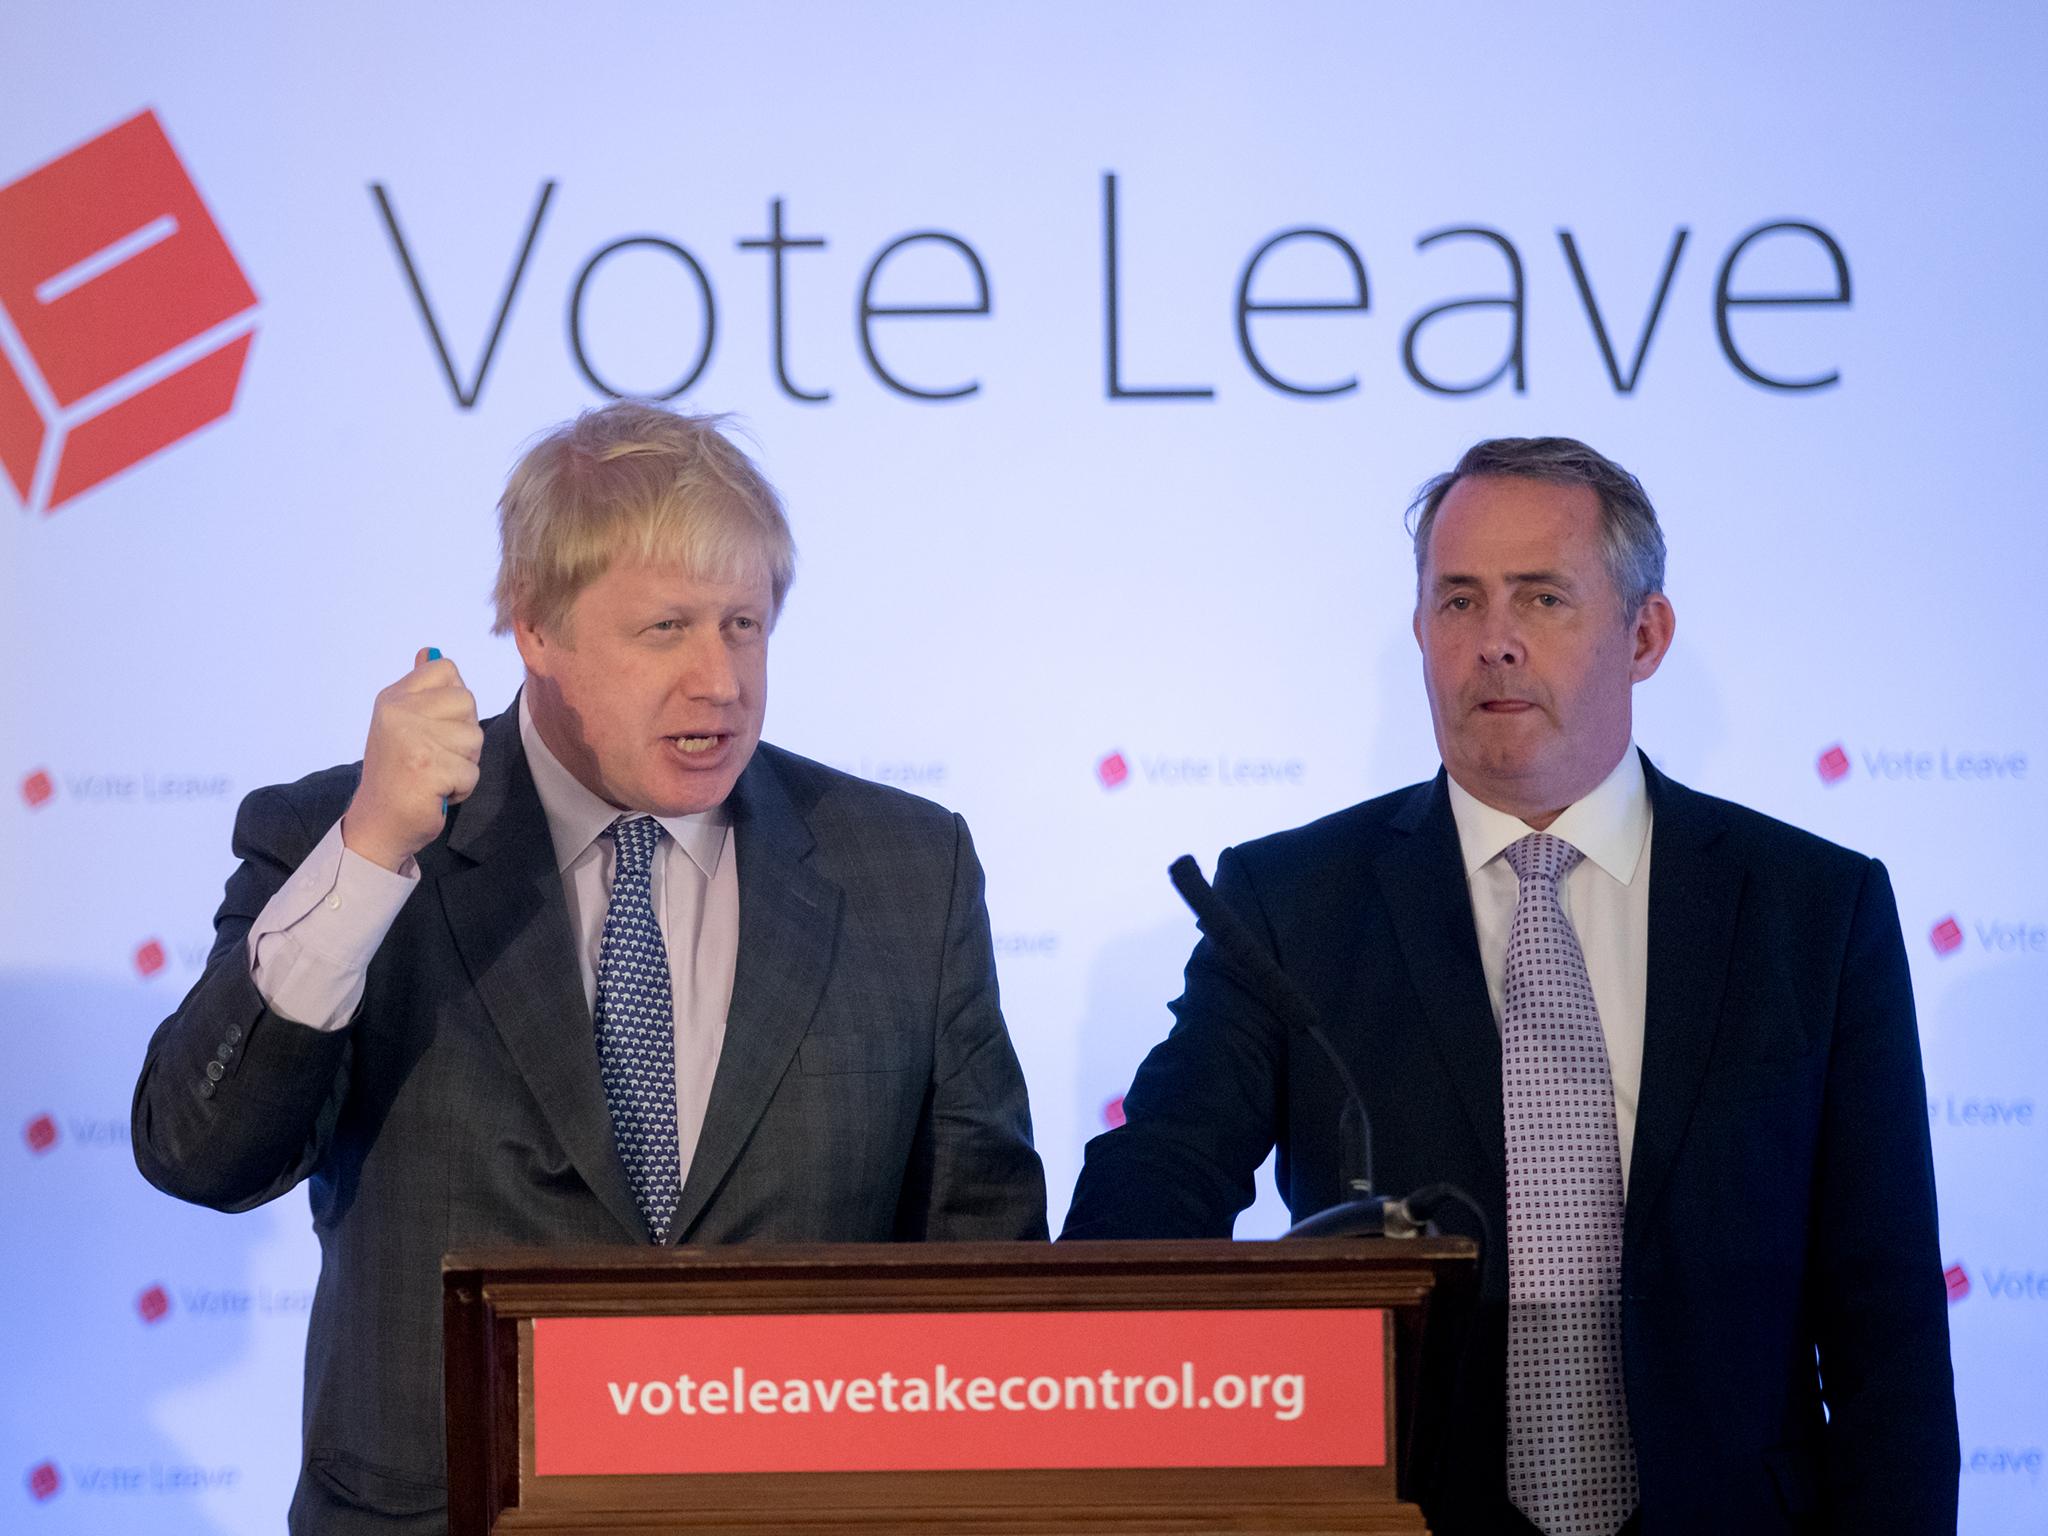 Conservative MP Boris Johnson (L) and Conservative MP and former Secretary of State for Defence Liam Fox speak at a Vote Leave event on May 14, 2016 in Bristol, England